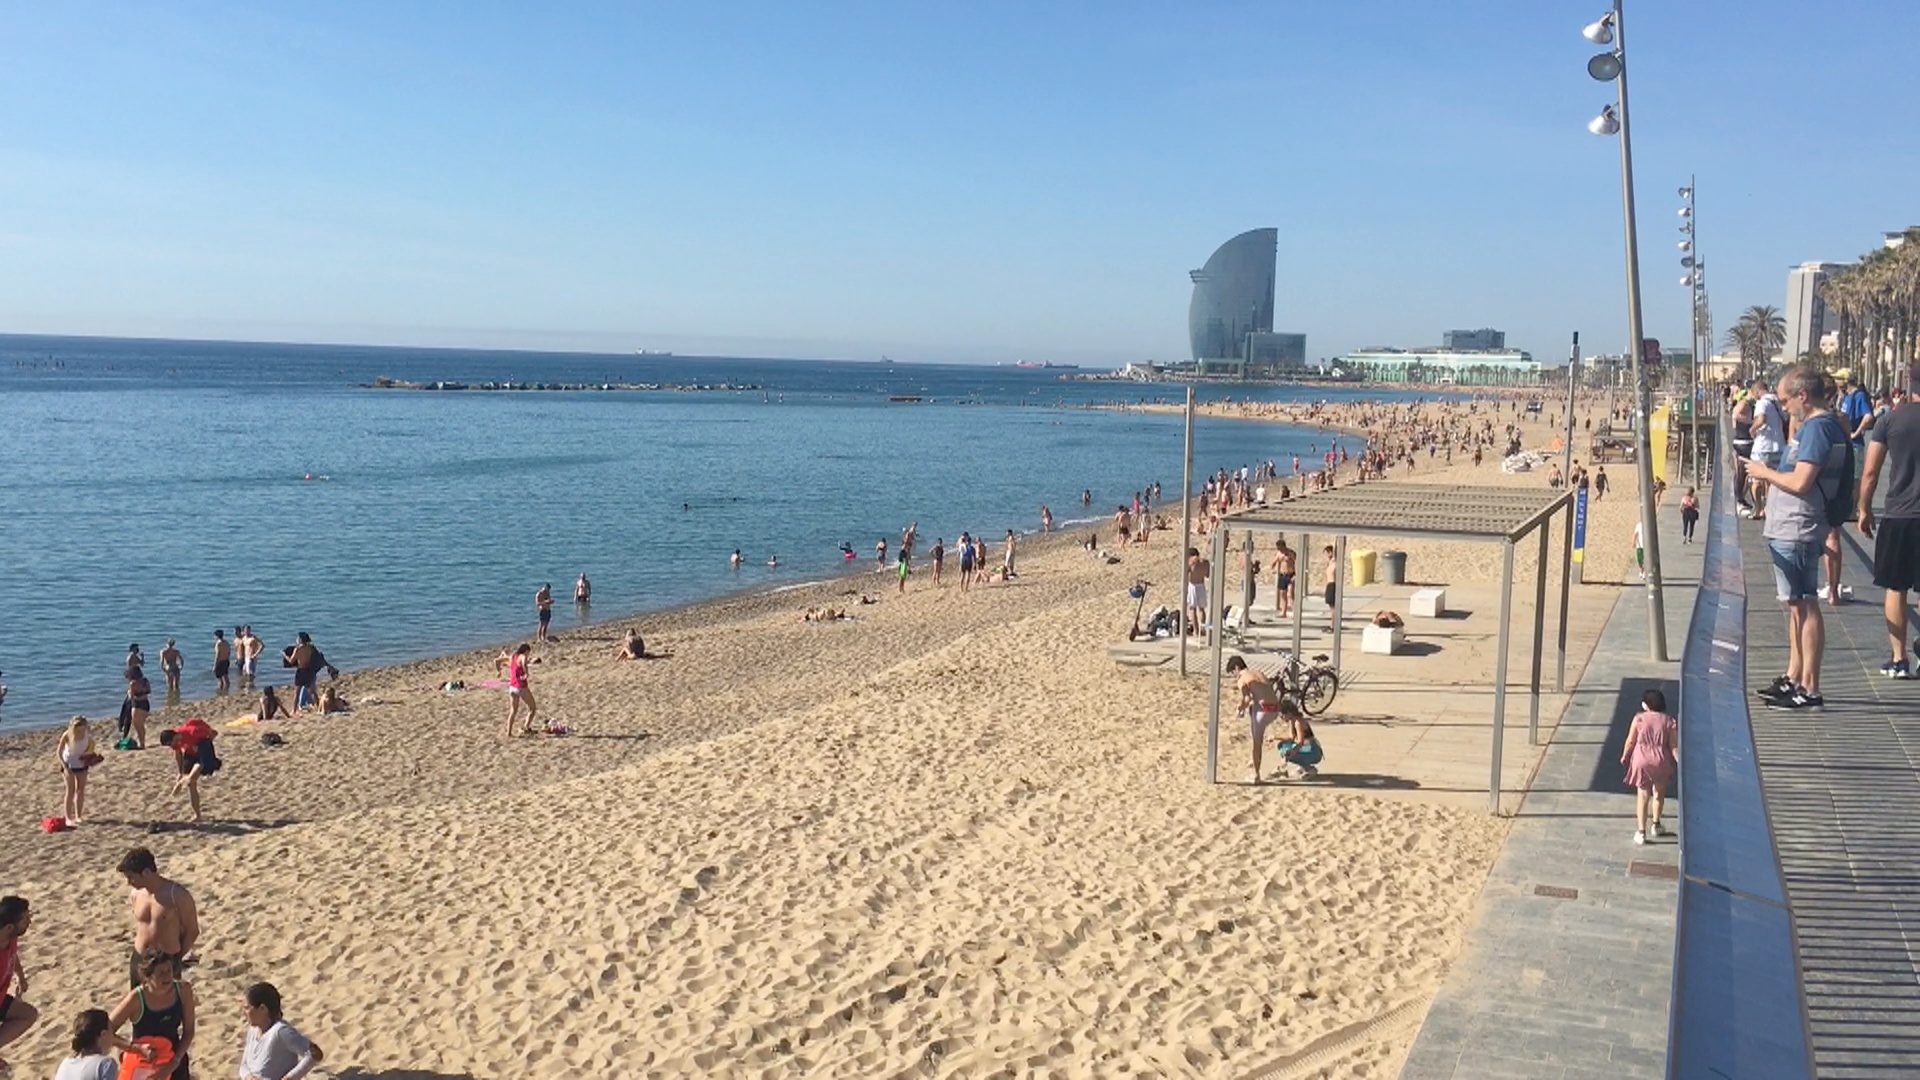 Barceloneta beach on the first weekend morning that people were allowed to go for strolls on the sand after pandemic restrictions eased